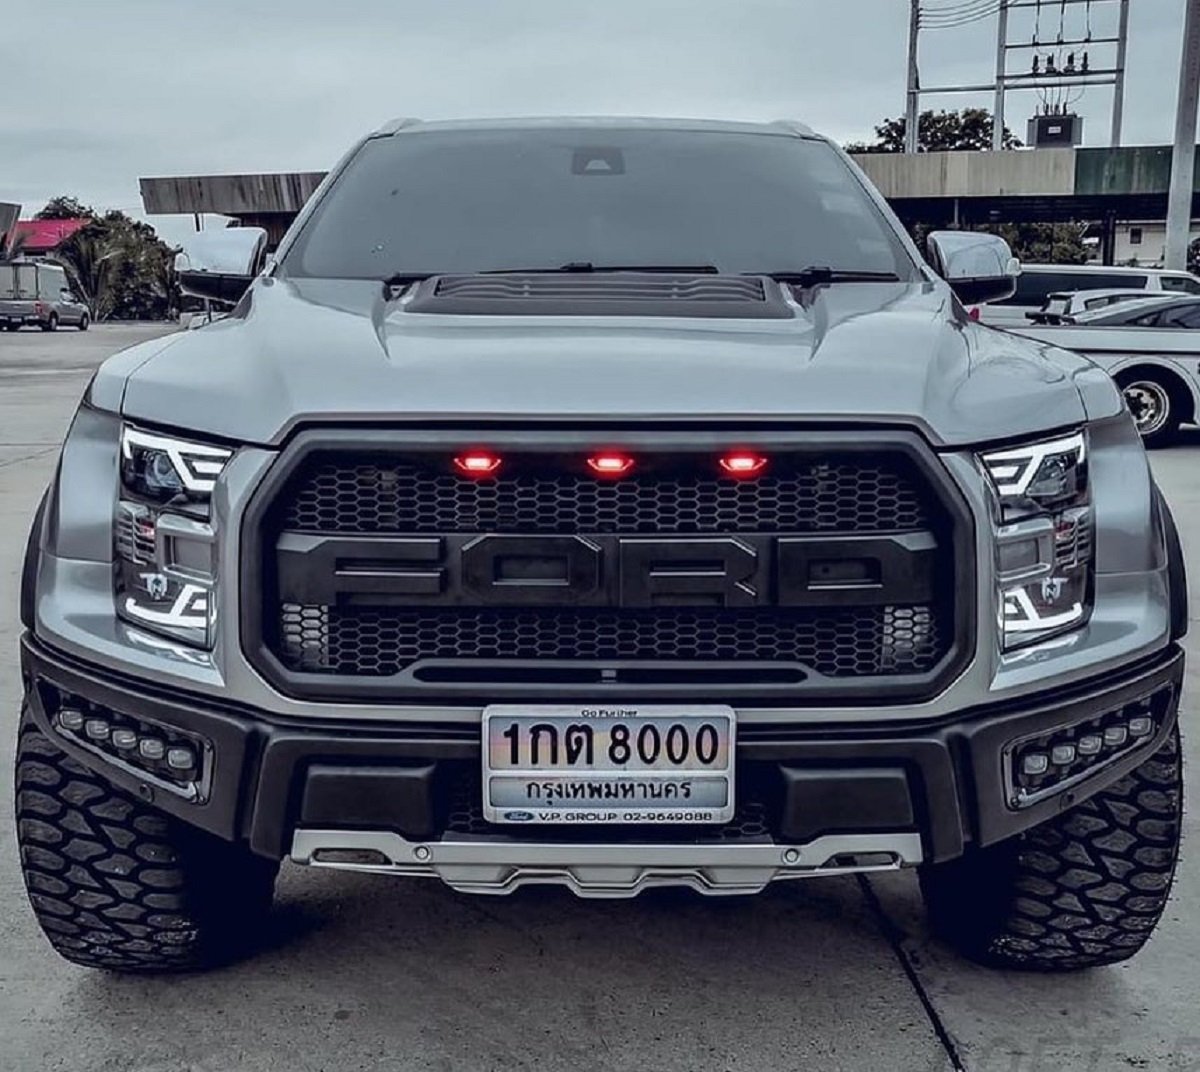 Ford Endeavour (Everest) Modified To Mimic Brawny Looks Of F-150 Raptor